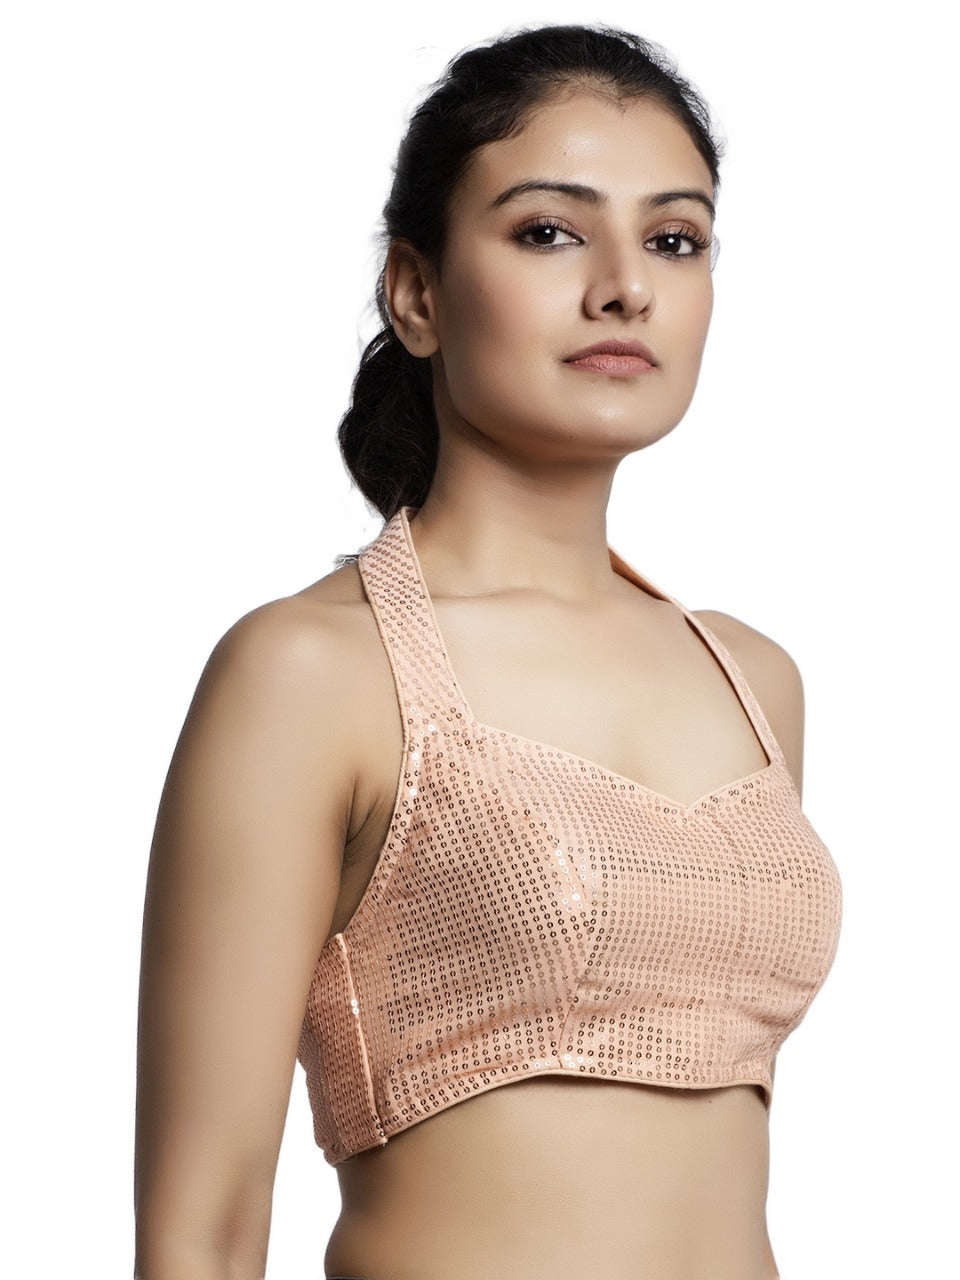 Saree Blouse Top in Shimmering Peach - Indian Clothing in Denver, CO, Aurora, CO, Boulder, CO, Fort Collins, CO, Colorado Springs, CO, Parker, CO, Highlands Ranch, CO, Cherry Creek, CO, Centennial, CO, and Longmont, CO. Nationwide shipping USA - India Fashion X